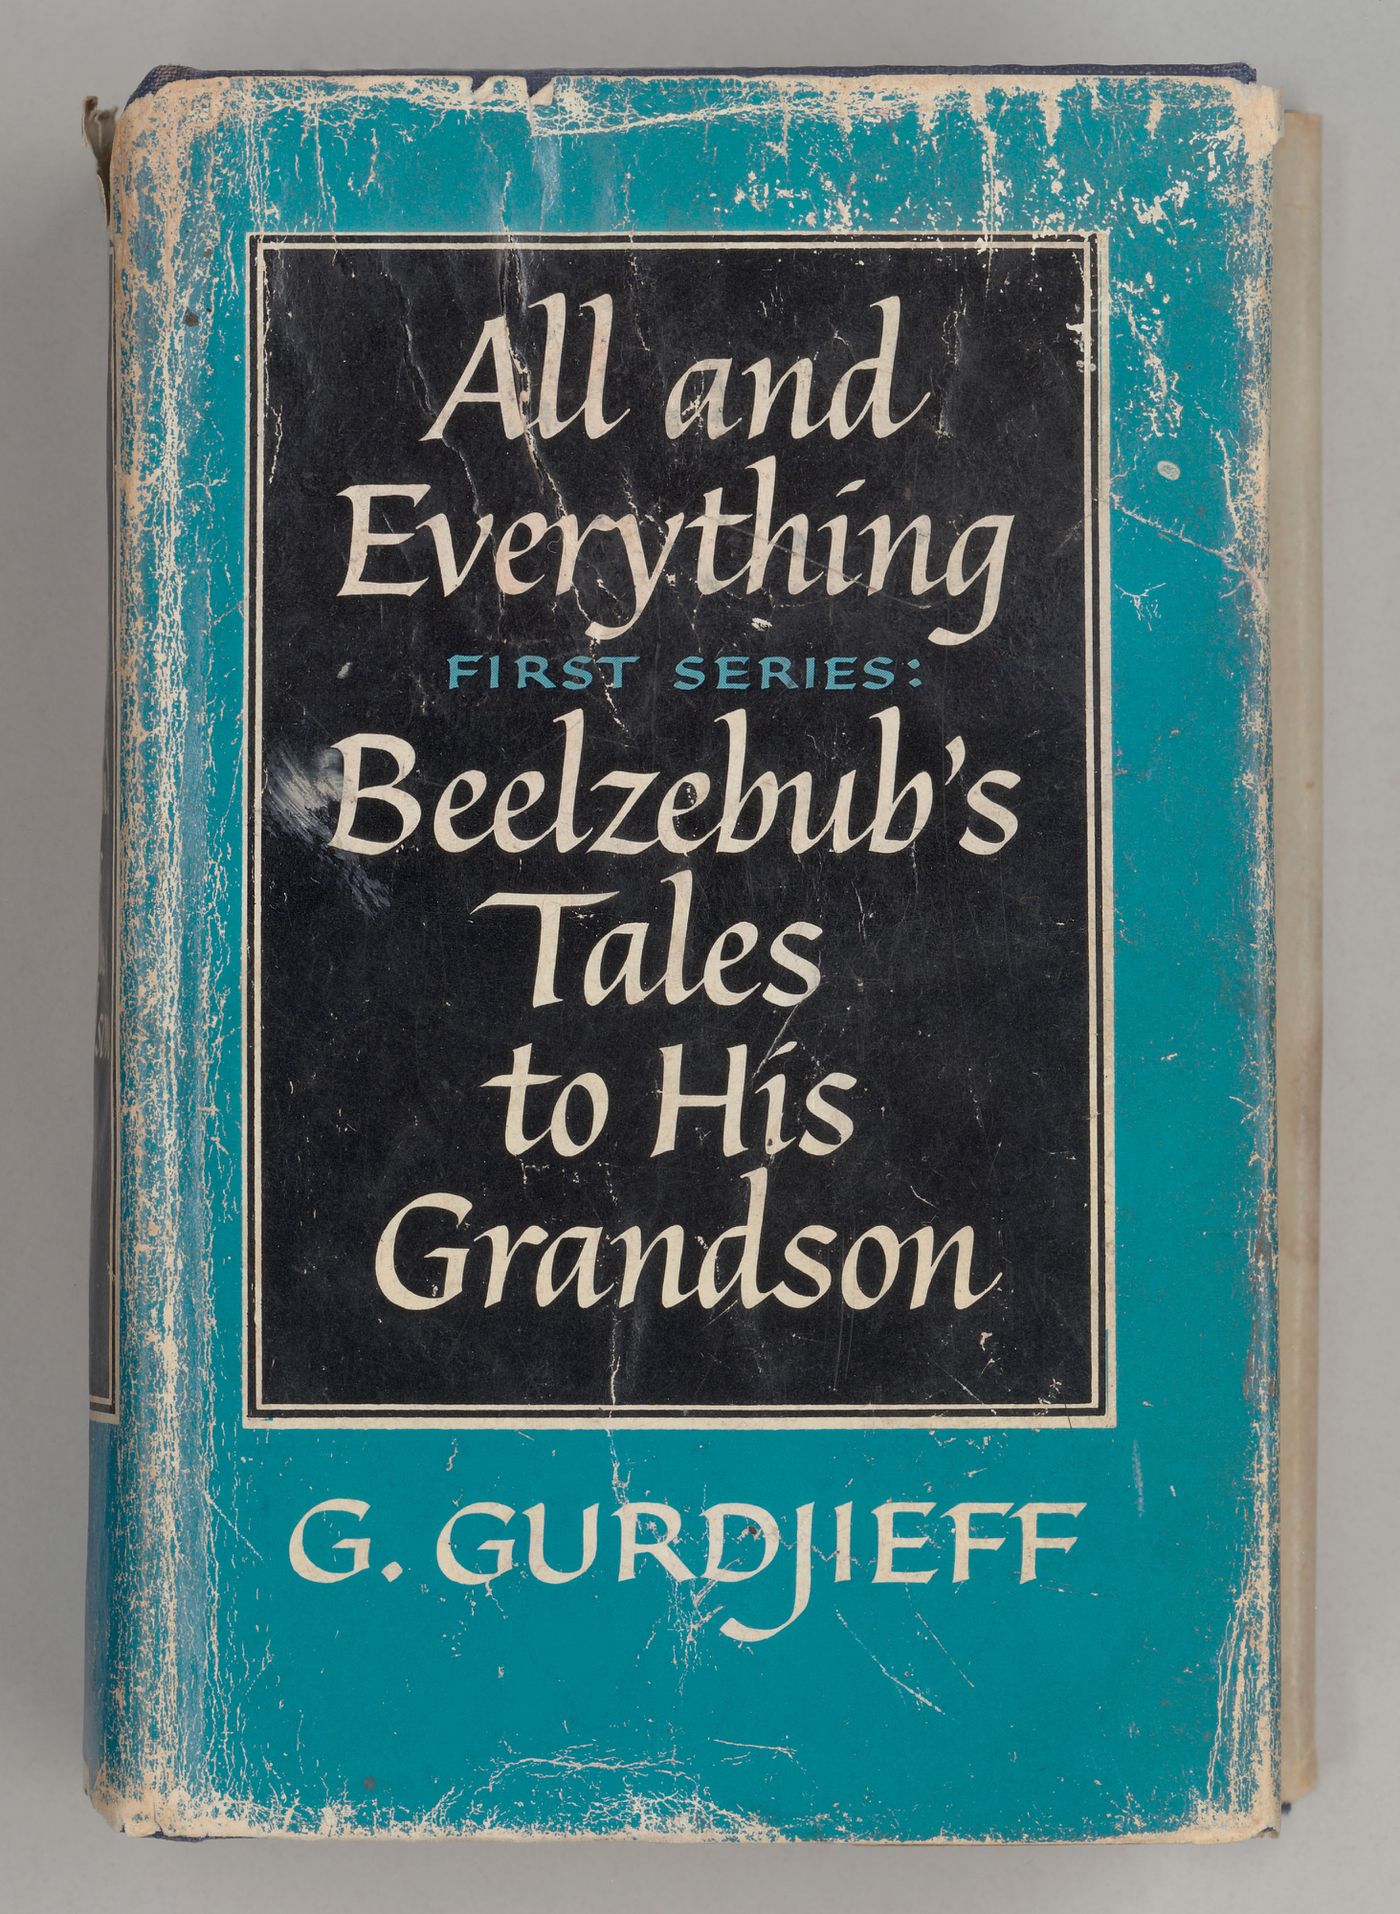 All and Everything: 1st Series: Beelzebub's Tales to His Grandson